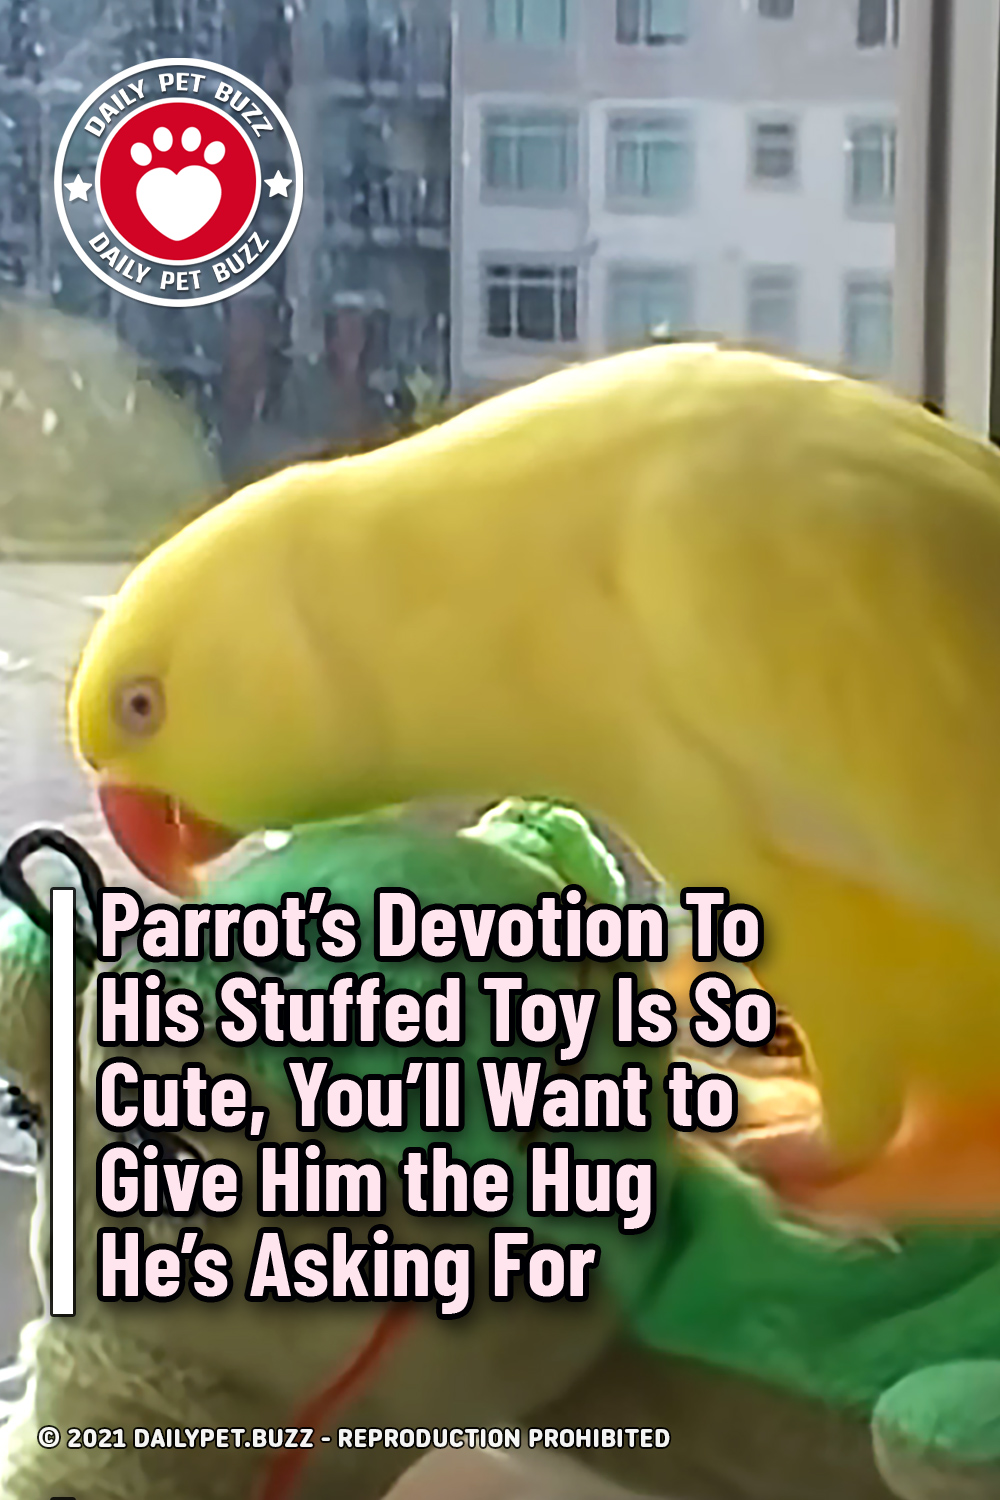 Parrot\'s Devotion To His Stuffed Toy Is So Cute, You\'ll Want to Give Him the Hug He’s Asking For